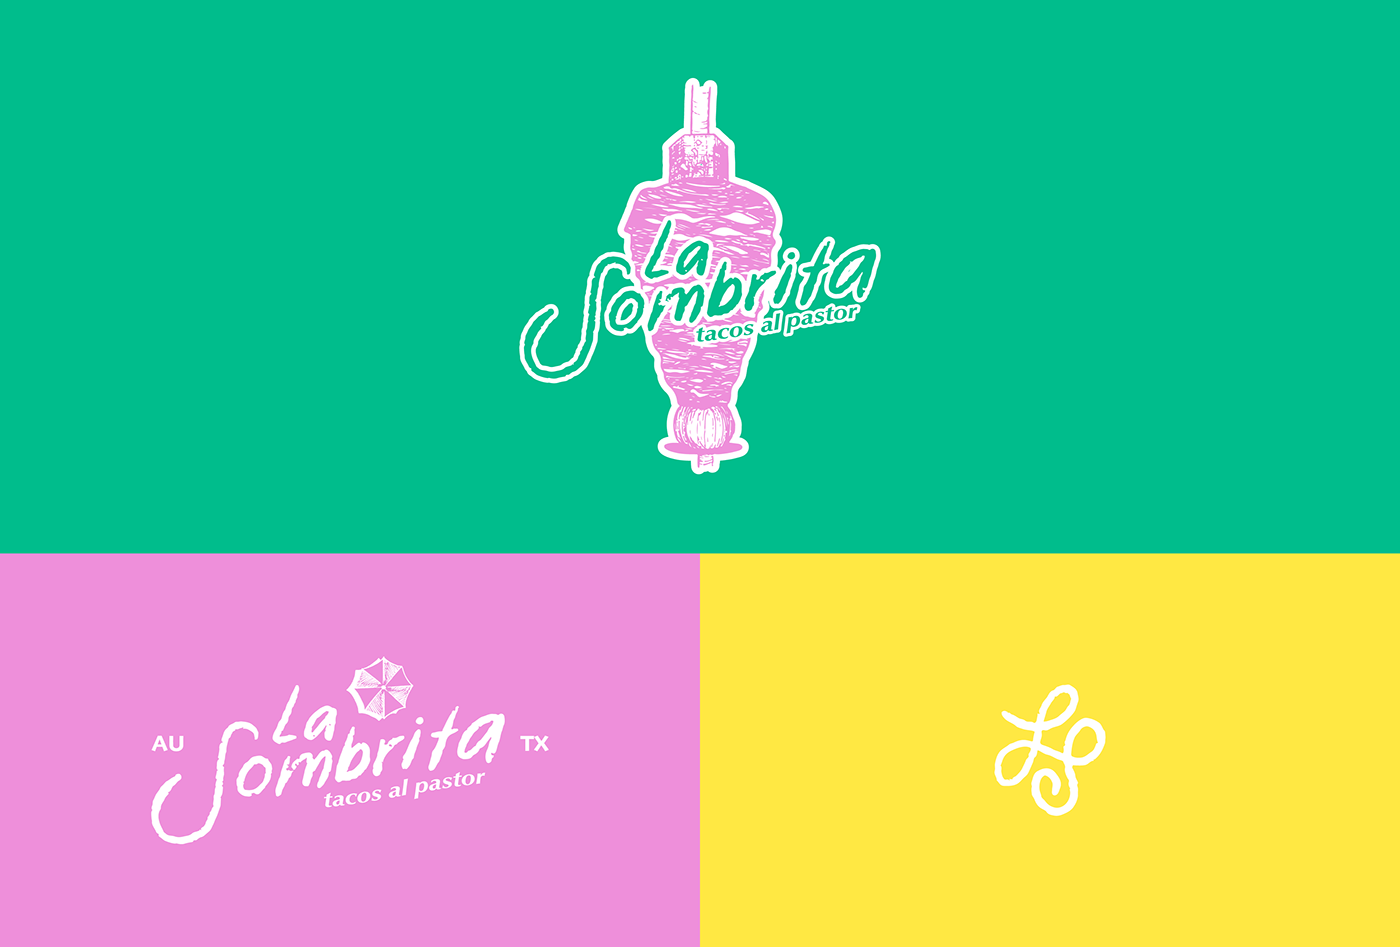 Logo variations for a Mexican restaurant.